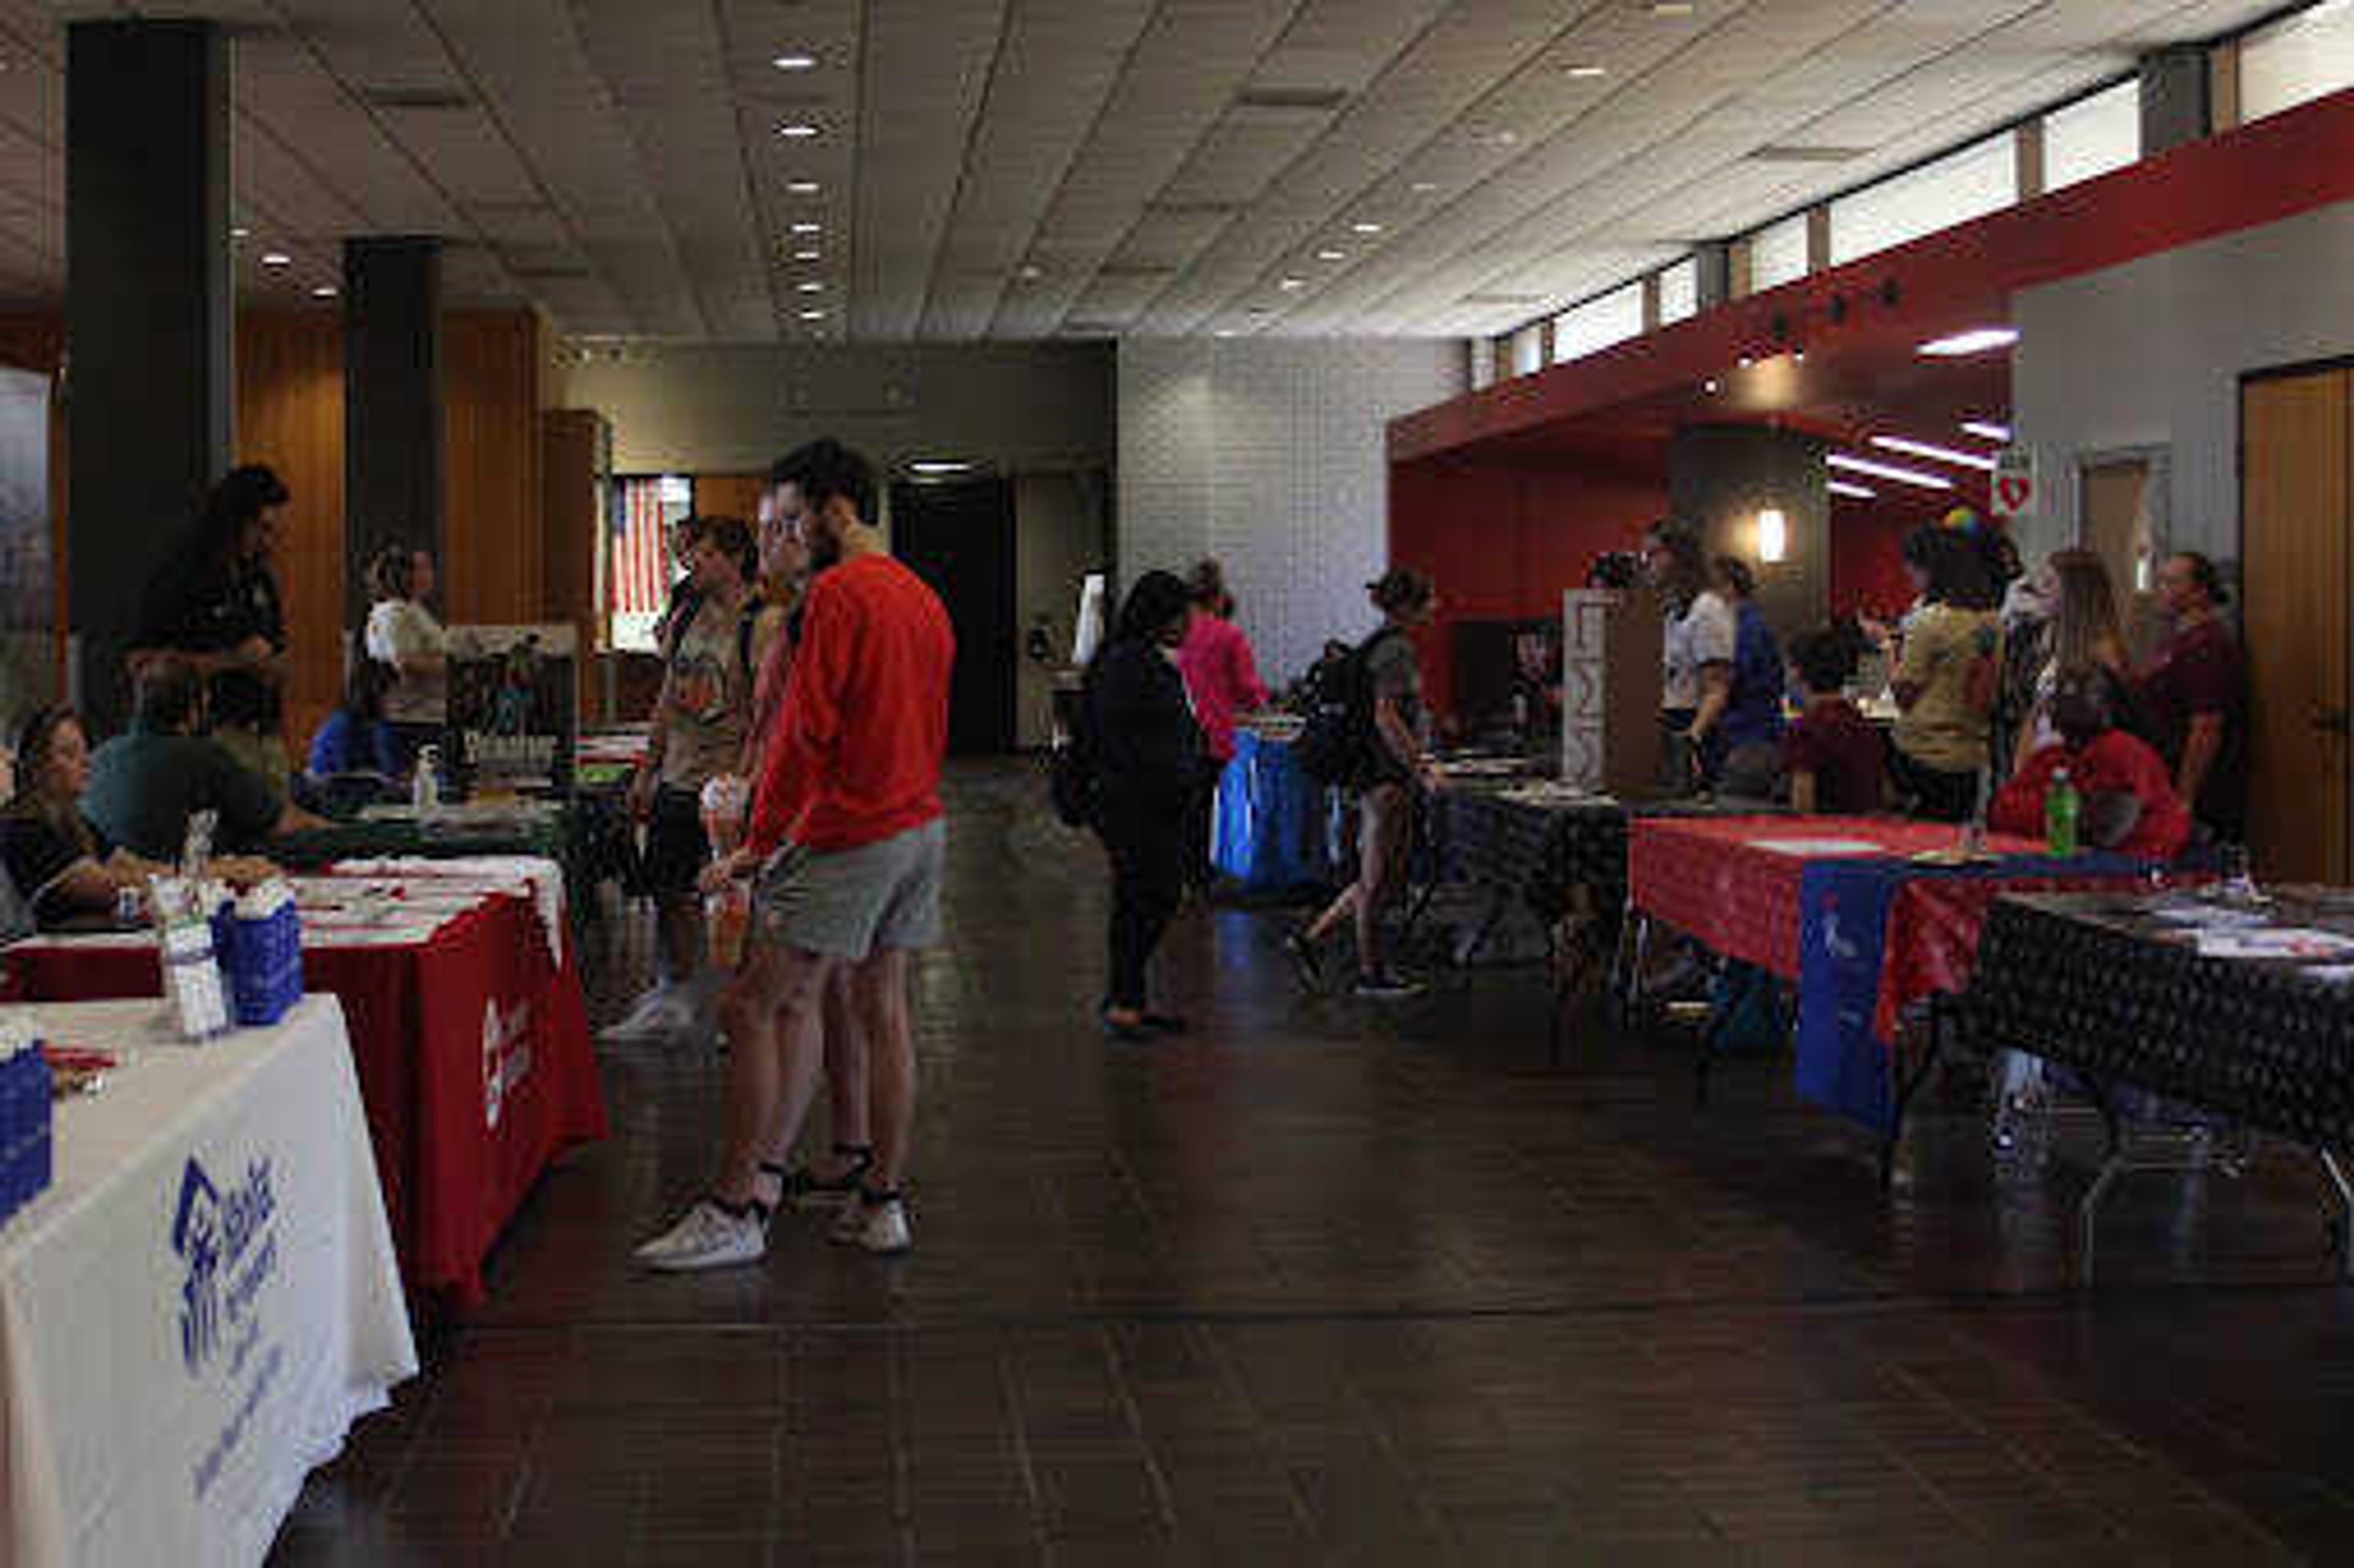 Students gather around organizations’ booths to learn about different ways to volunteer. On the left, students speak to the American Red Cross.